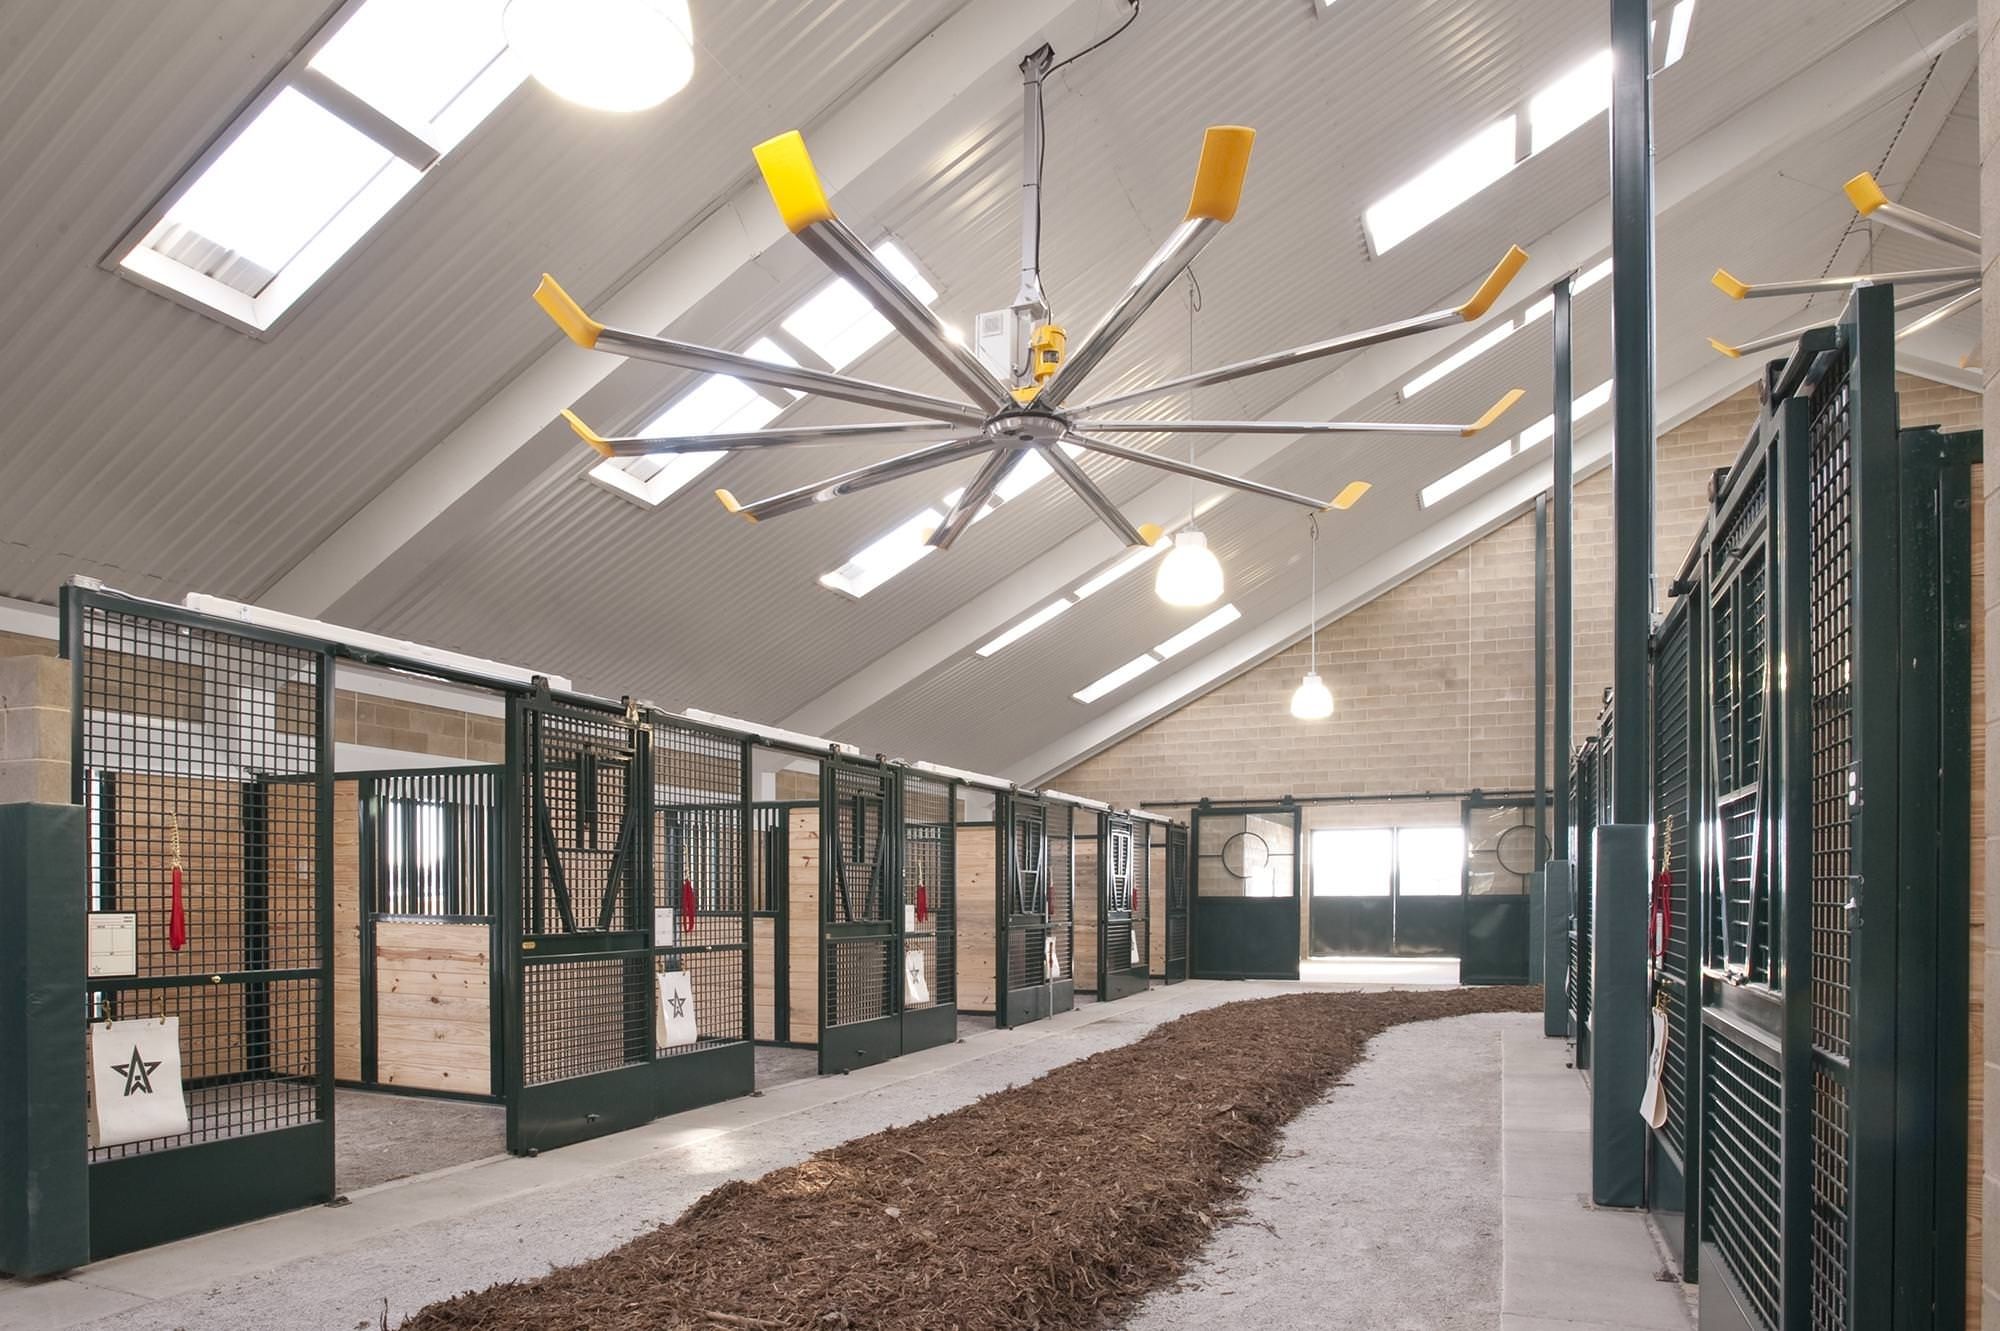 Most Popular Large Ceiling Fans For Stables, Riding Arenas & Horse Stables From Regarding Outdoor Ceiling Fans For Barns (View 10 of 20)